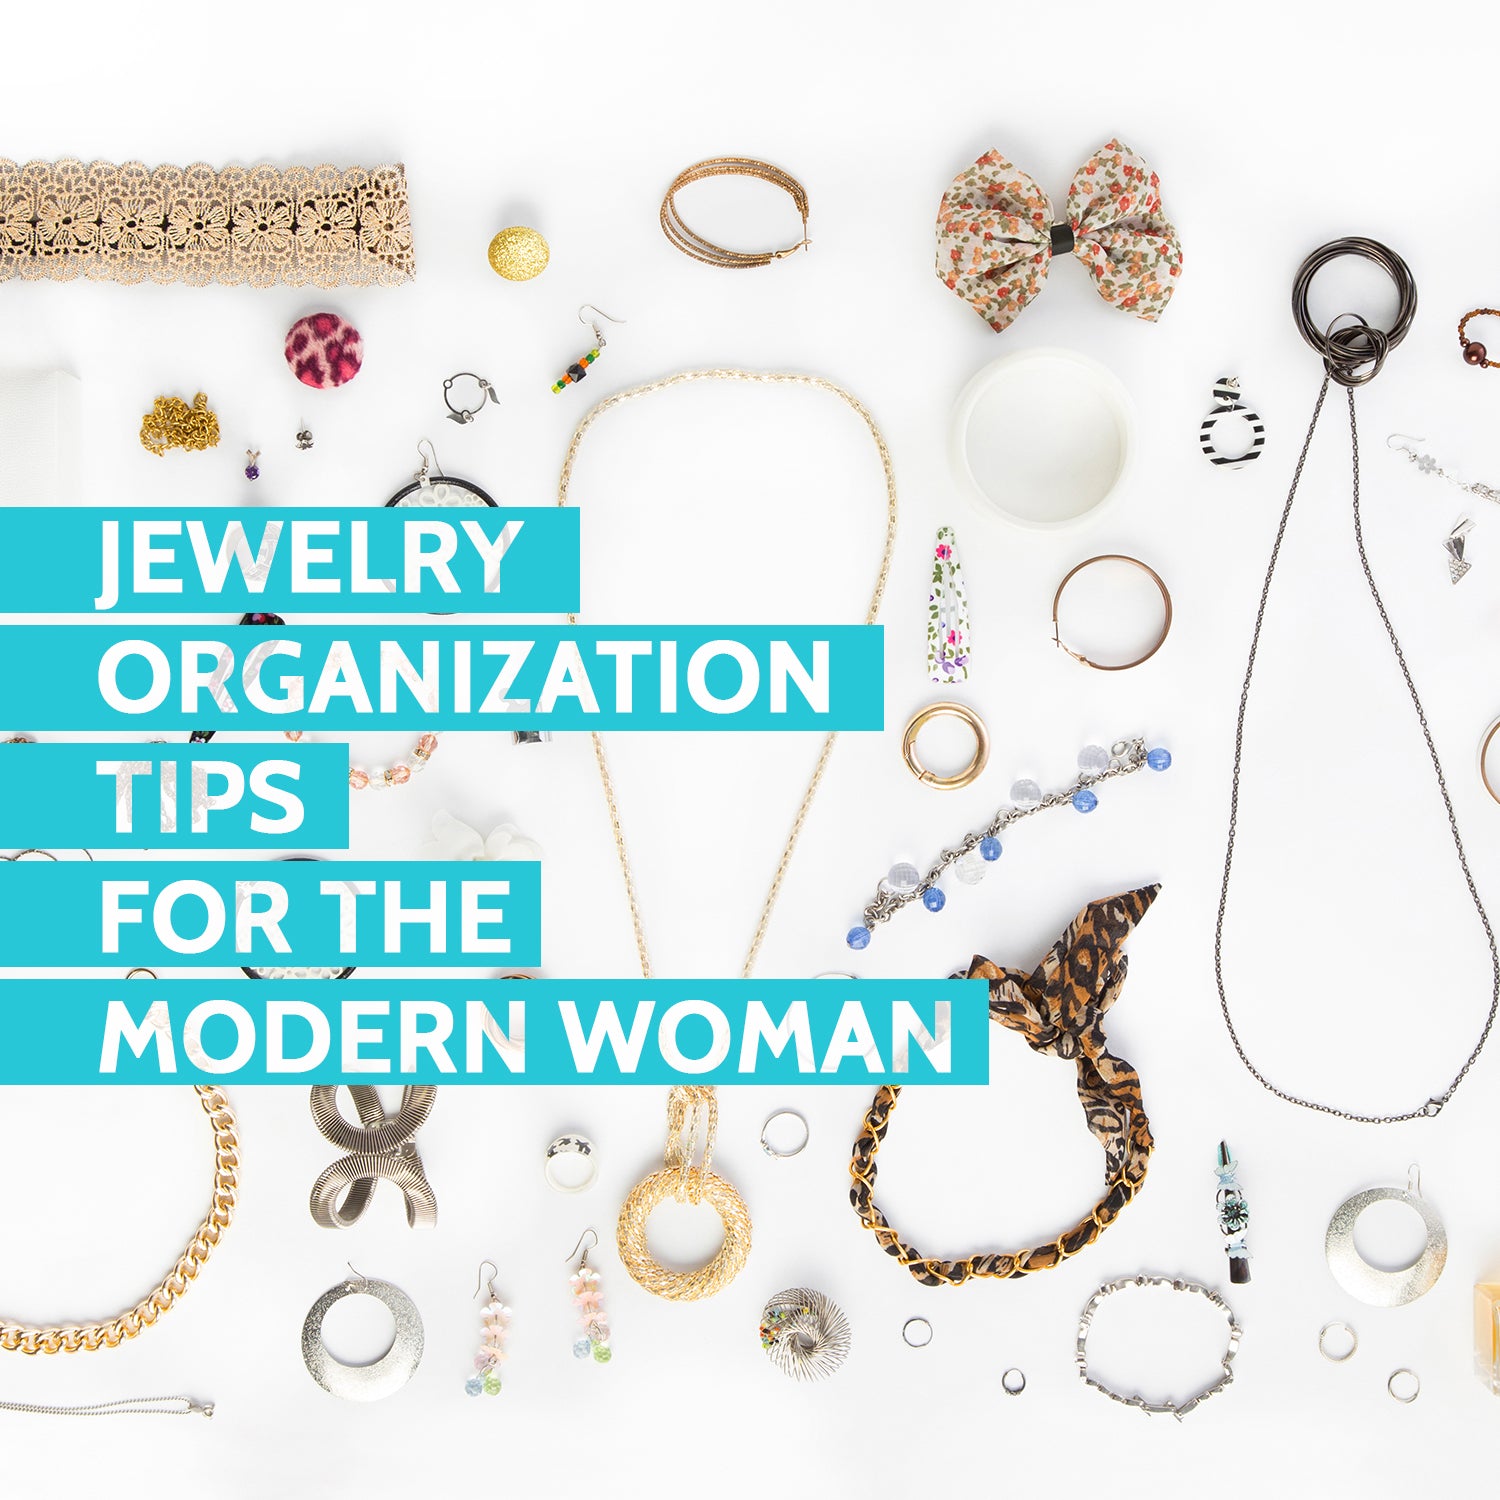 Jewelry organization tips for the modern woman